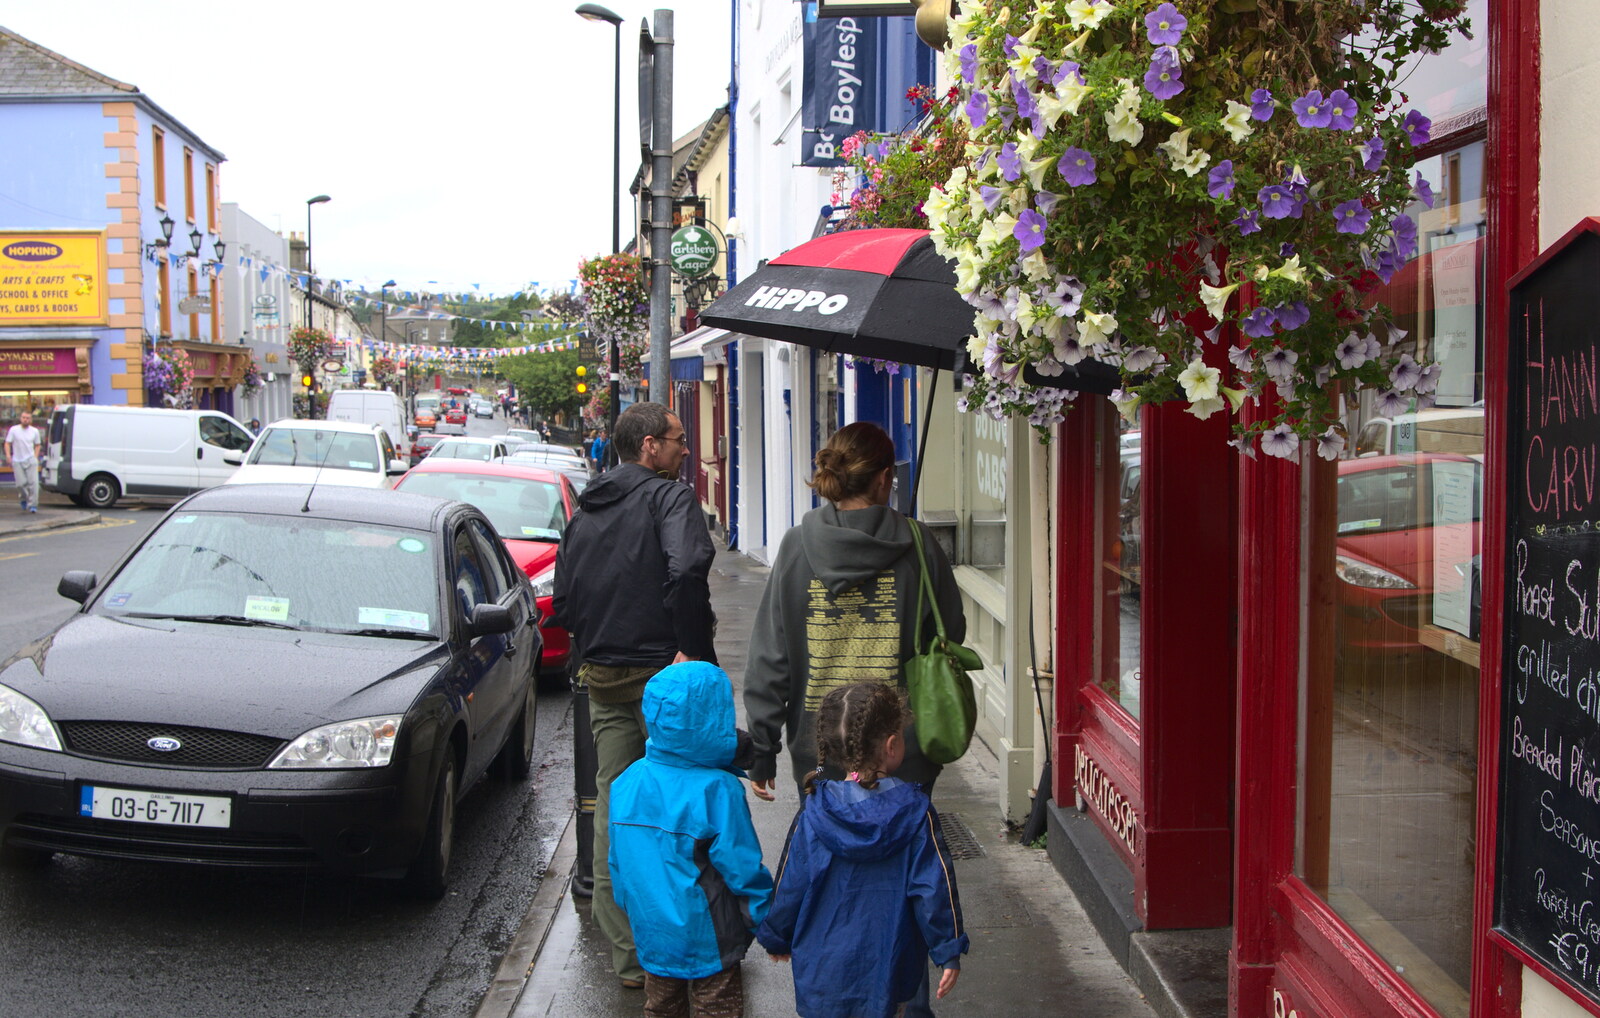 On Wicklow high street from Camping at Silver Strand, Wicklow, County Wicklow, Ireland - 7th August 2014